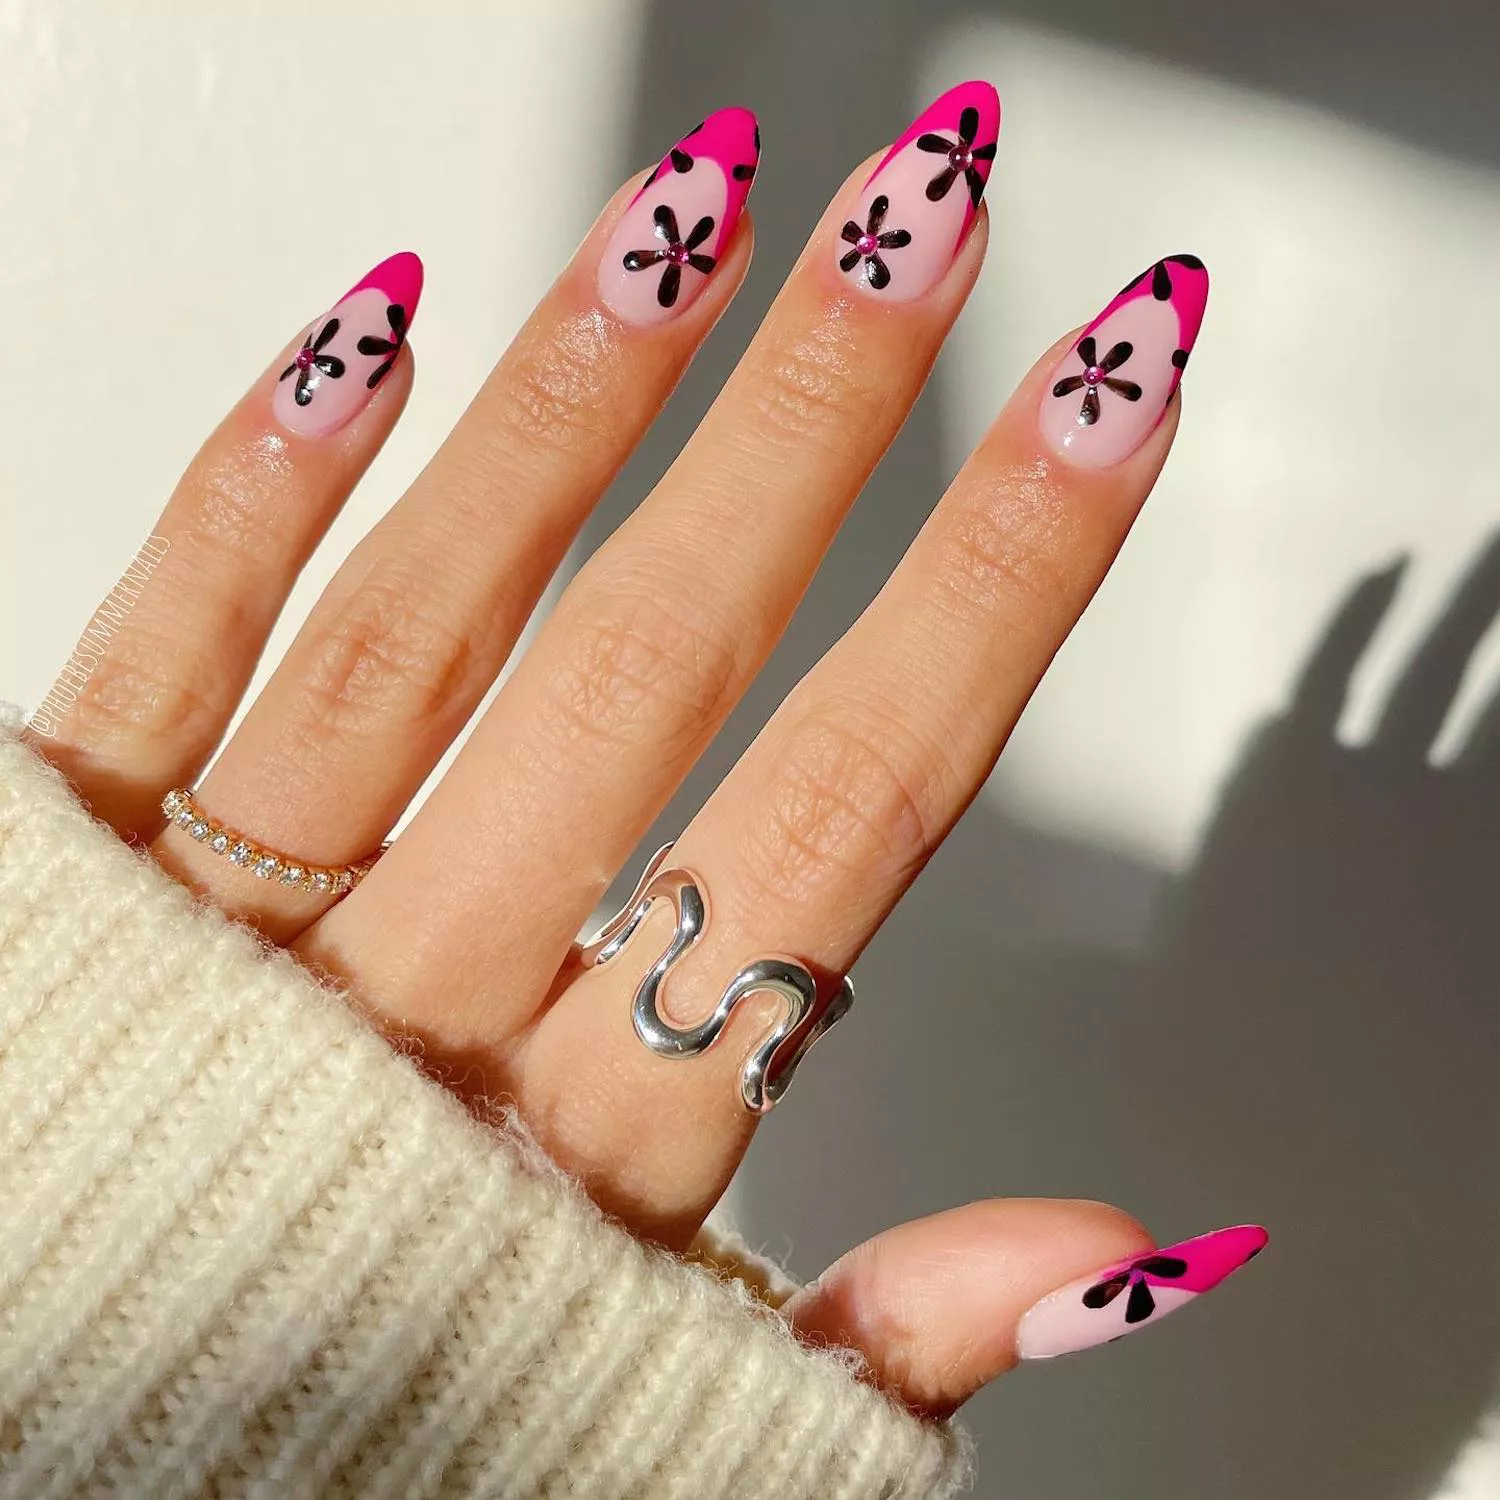 Hot pink French manicure with black daisy retro floral designs